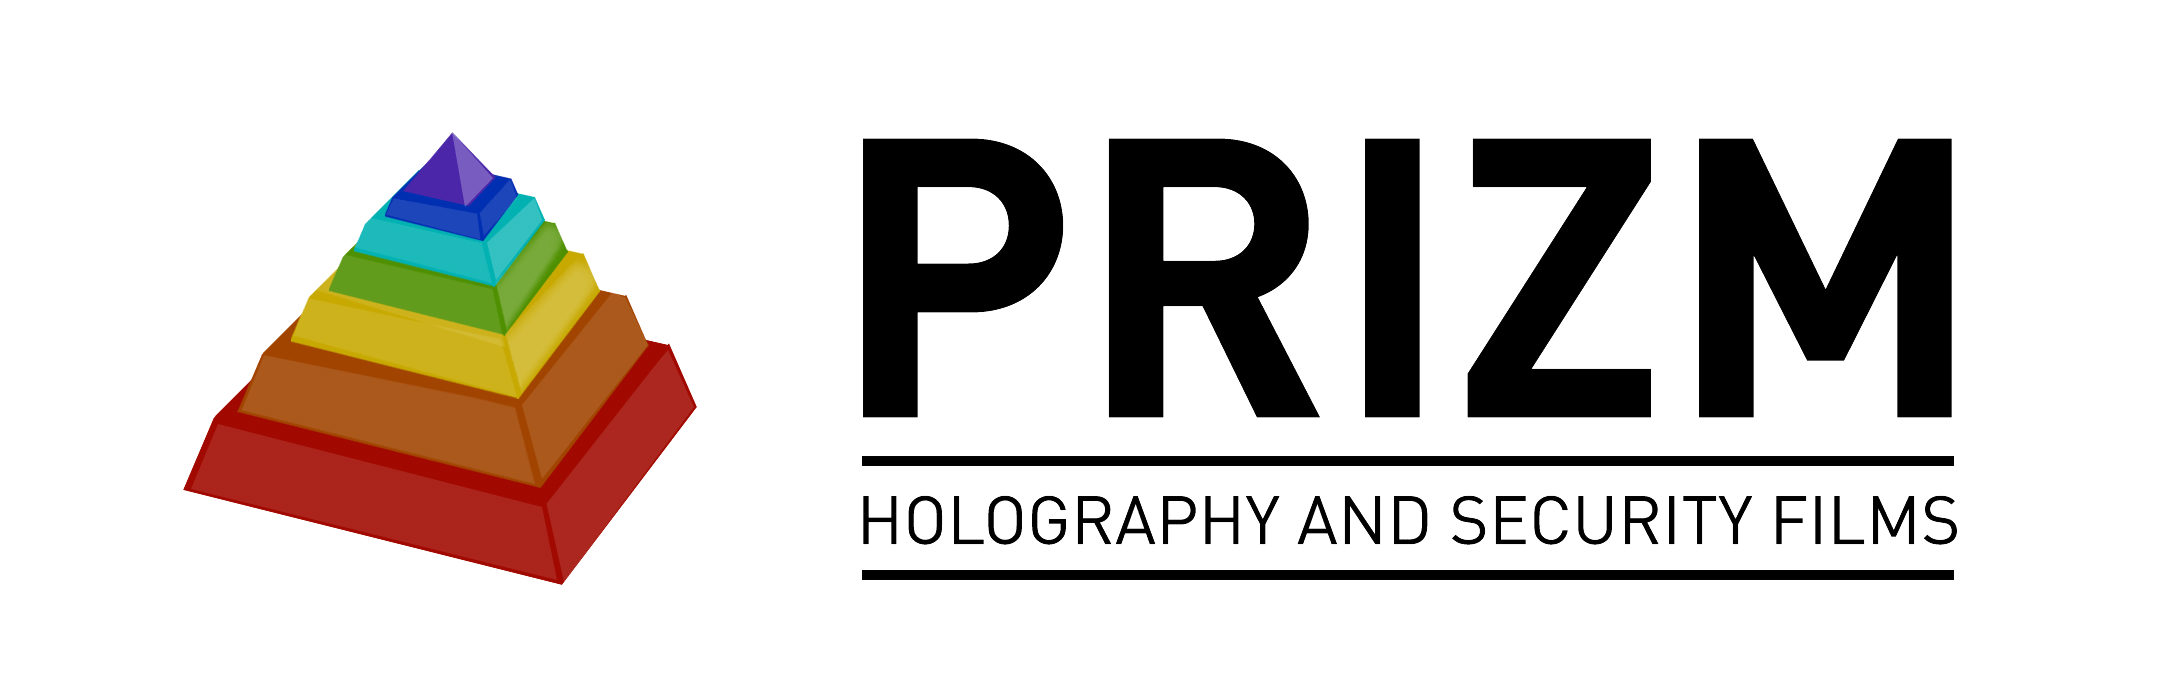 PRIZM HOLOGRAPHY AND SECURITY FILMS PVT LTD